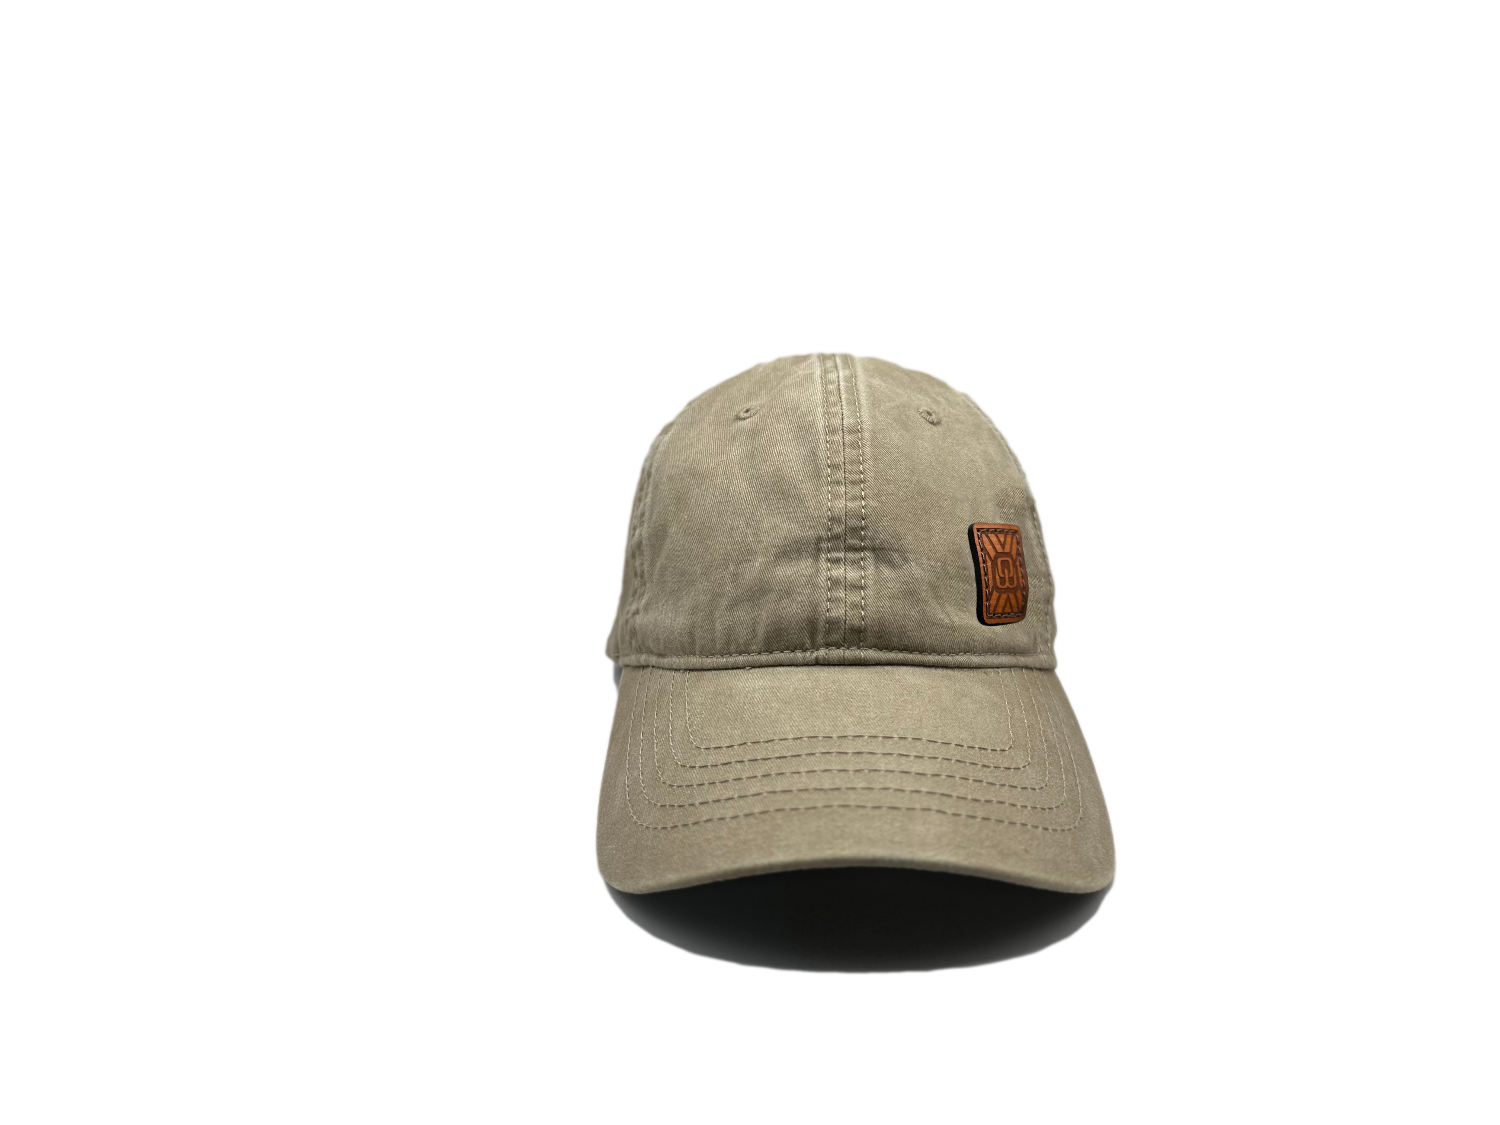 Women's baseball hat with leather patch. Our custom designed leather patch is laser engraved and sewn onto a women's cap. We use full-grain, veg tanned leather. Women's hats have a hidden pony tail opening and makeup resistant band.